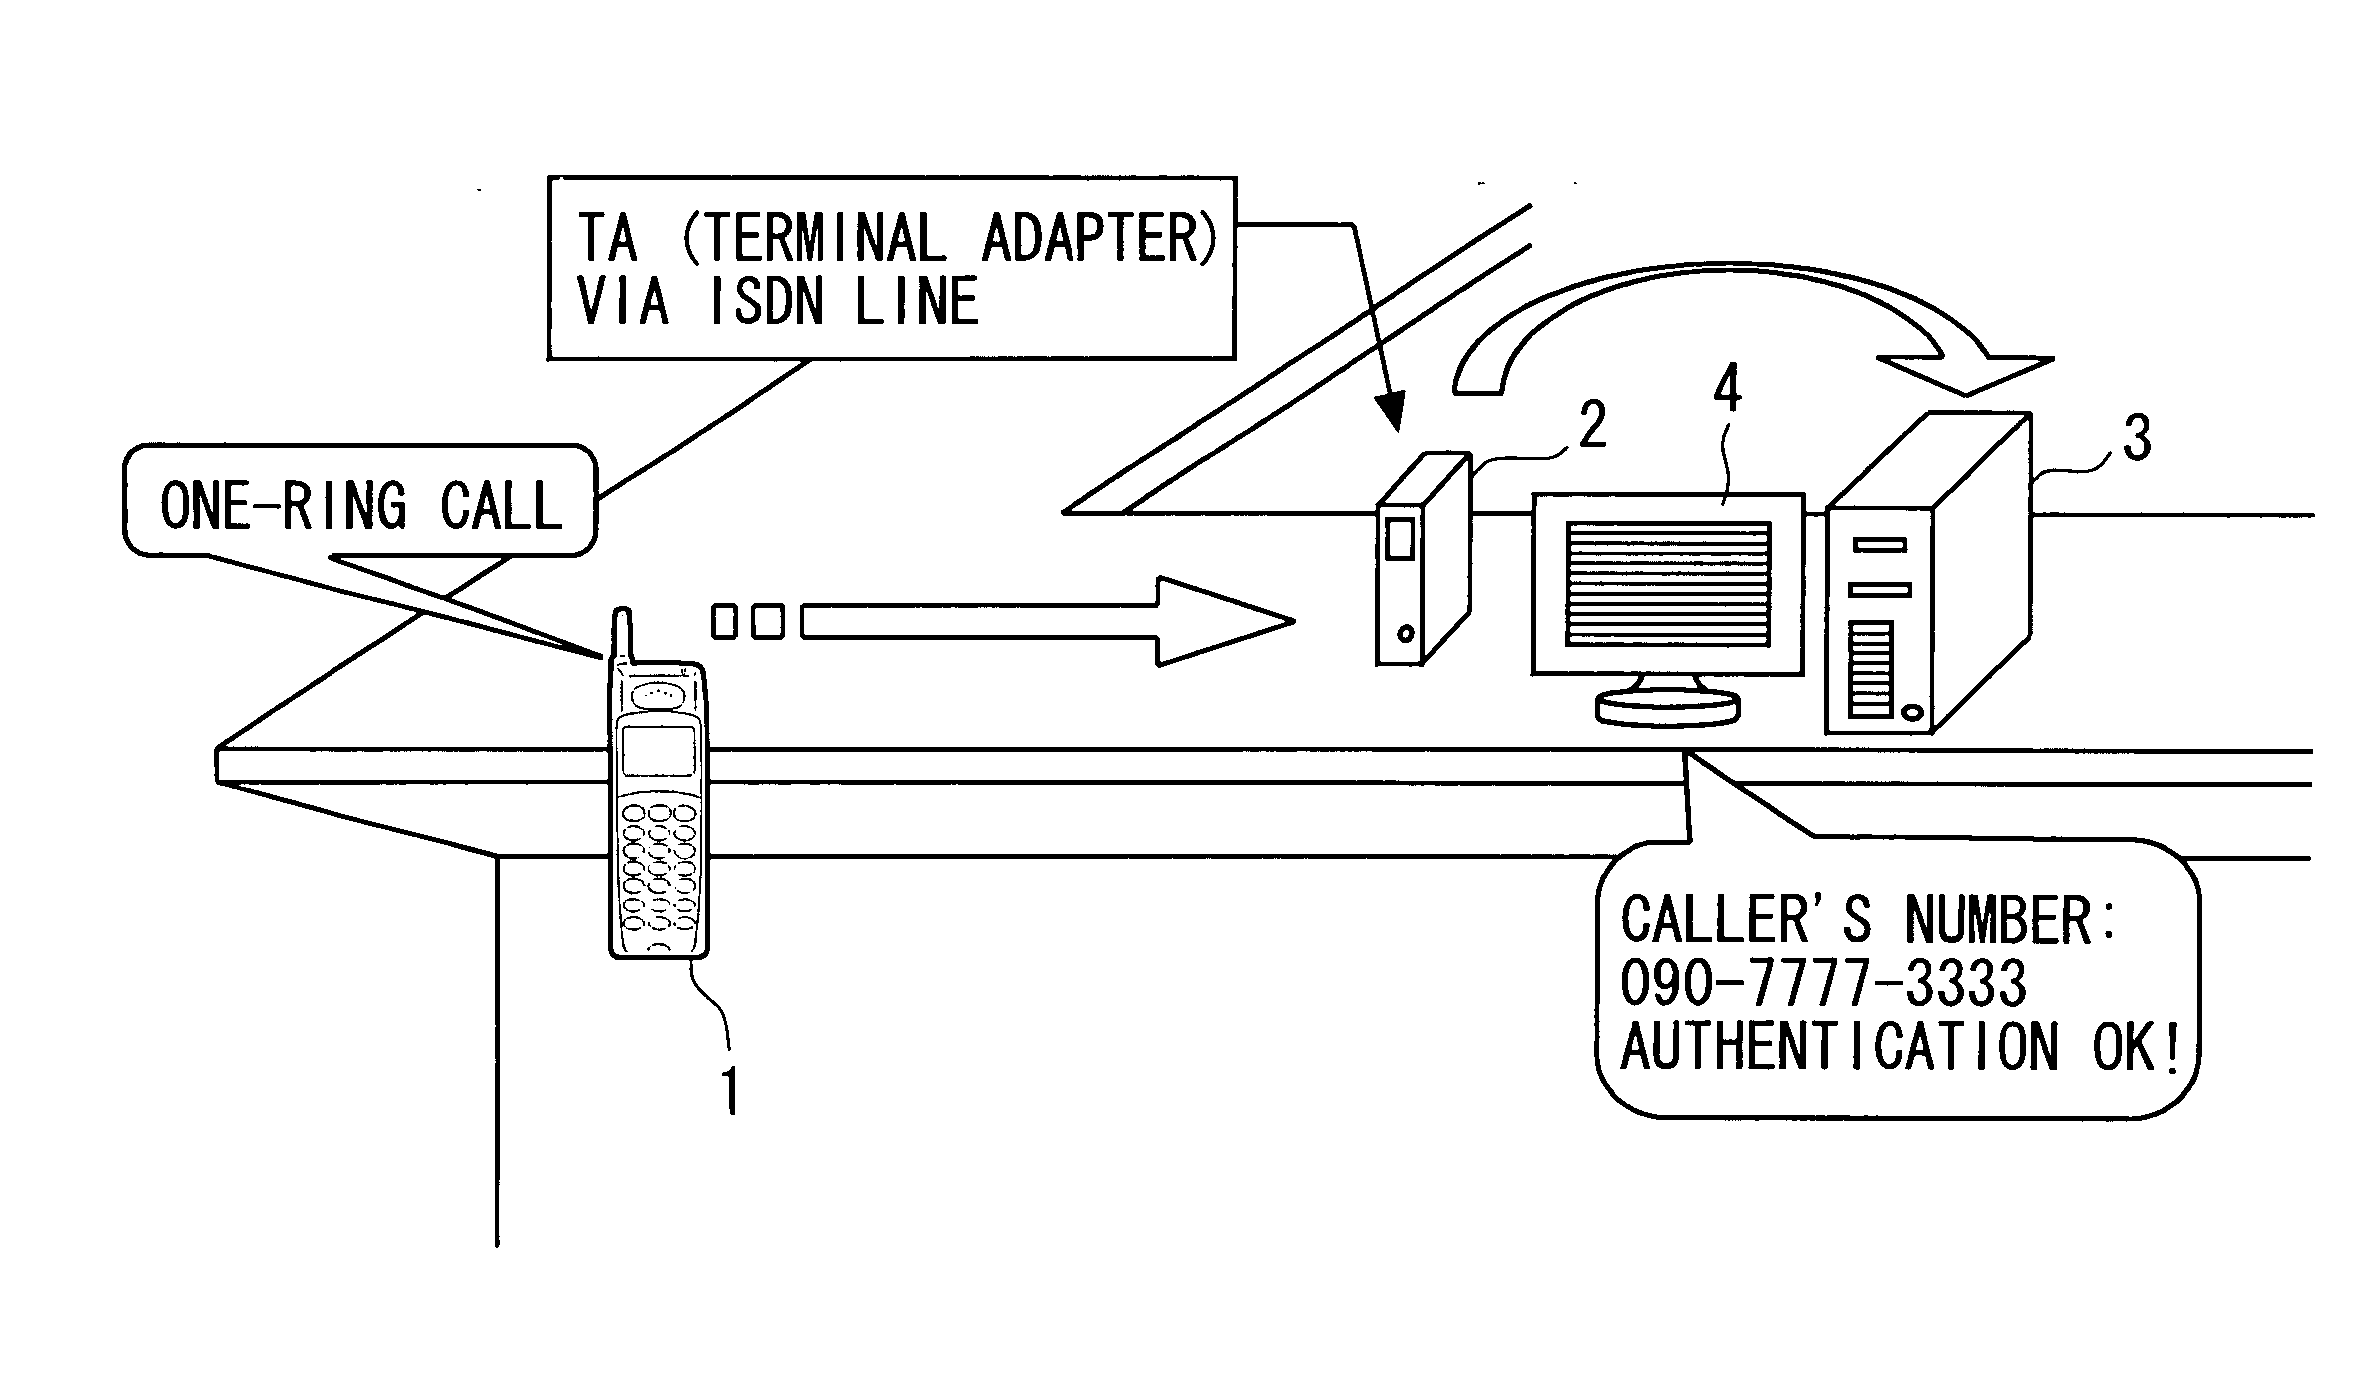 Member authentication system